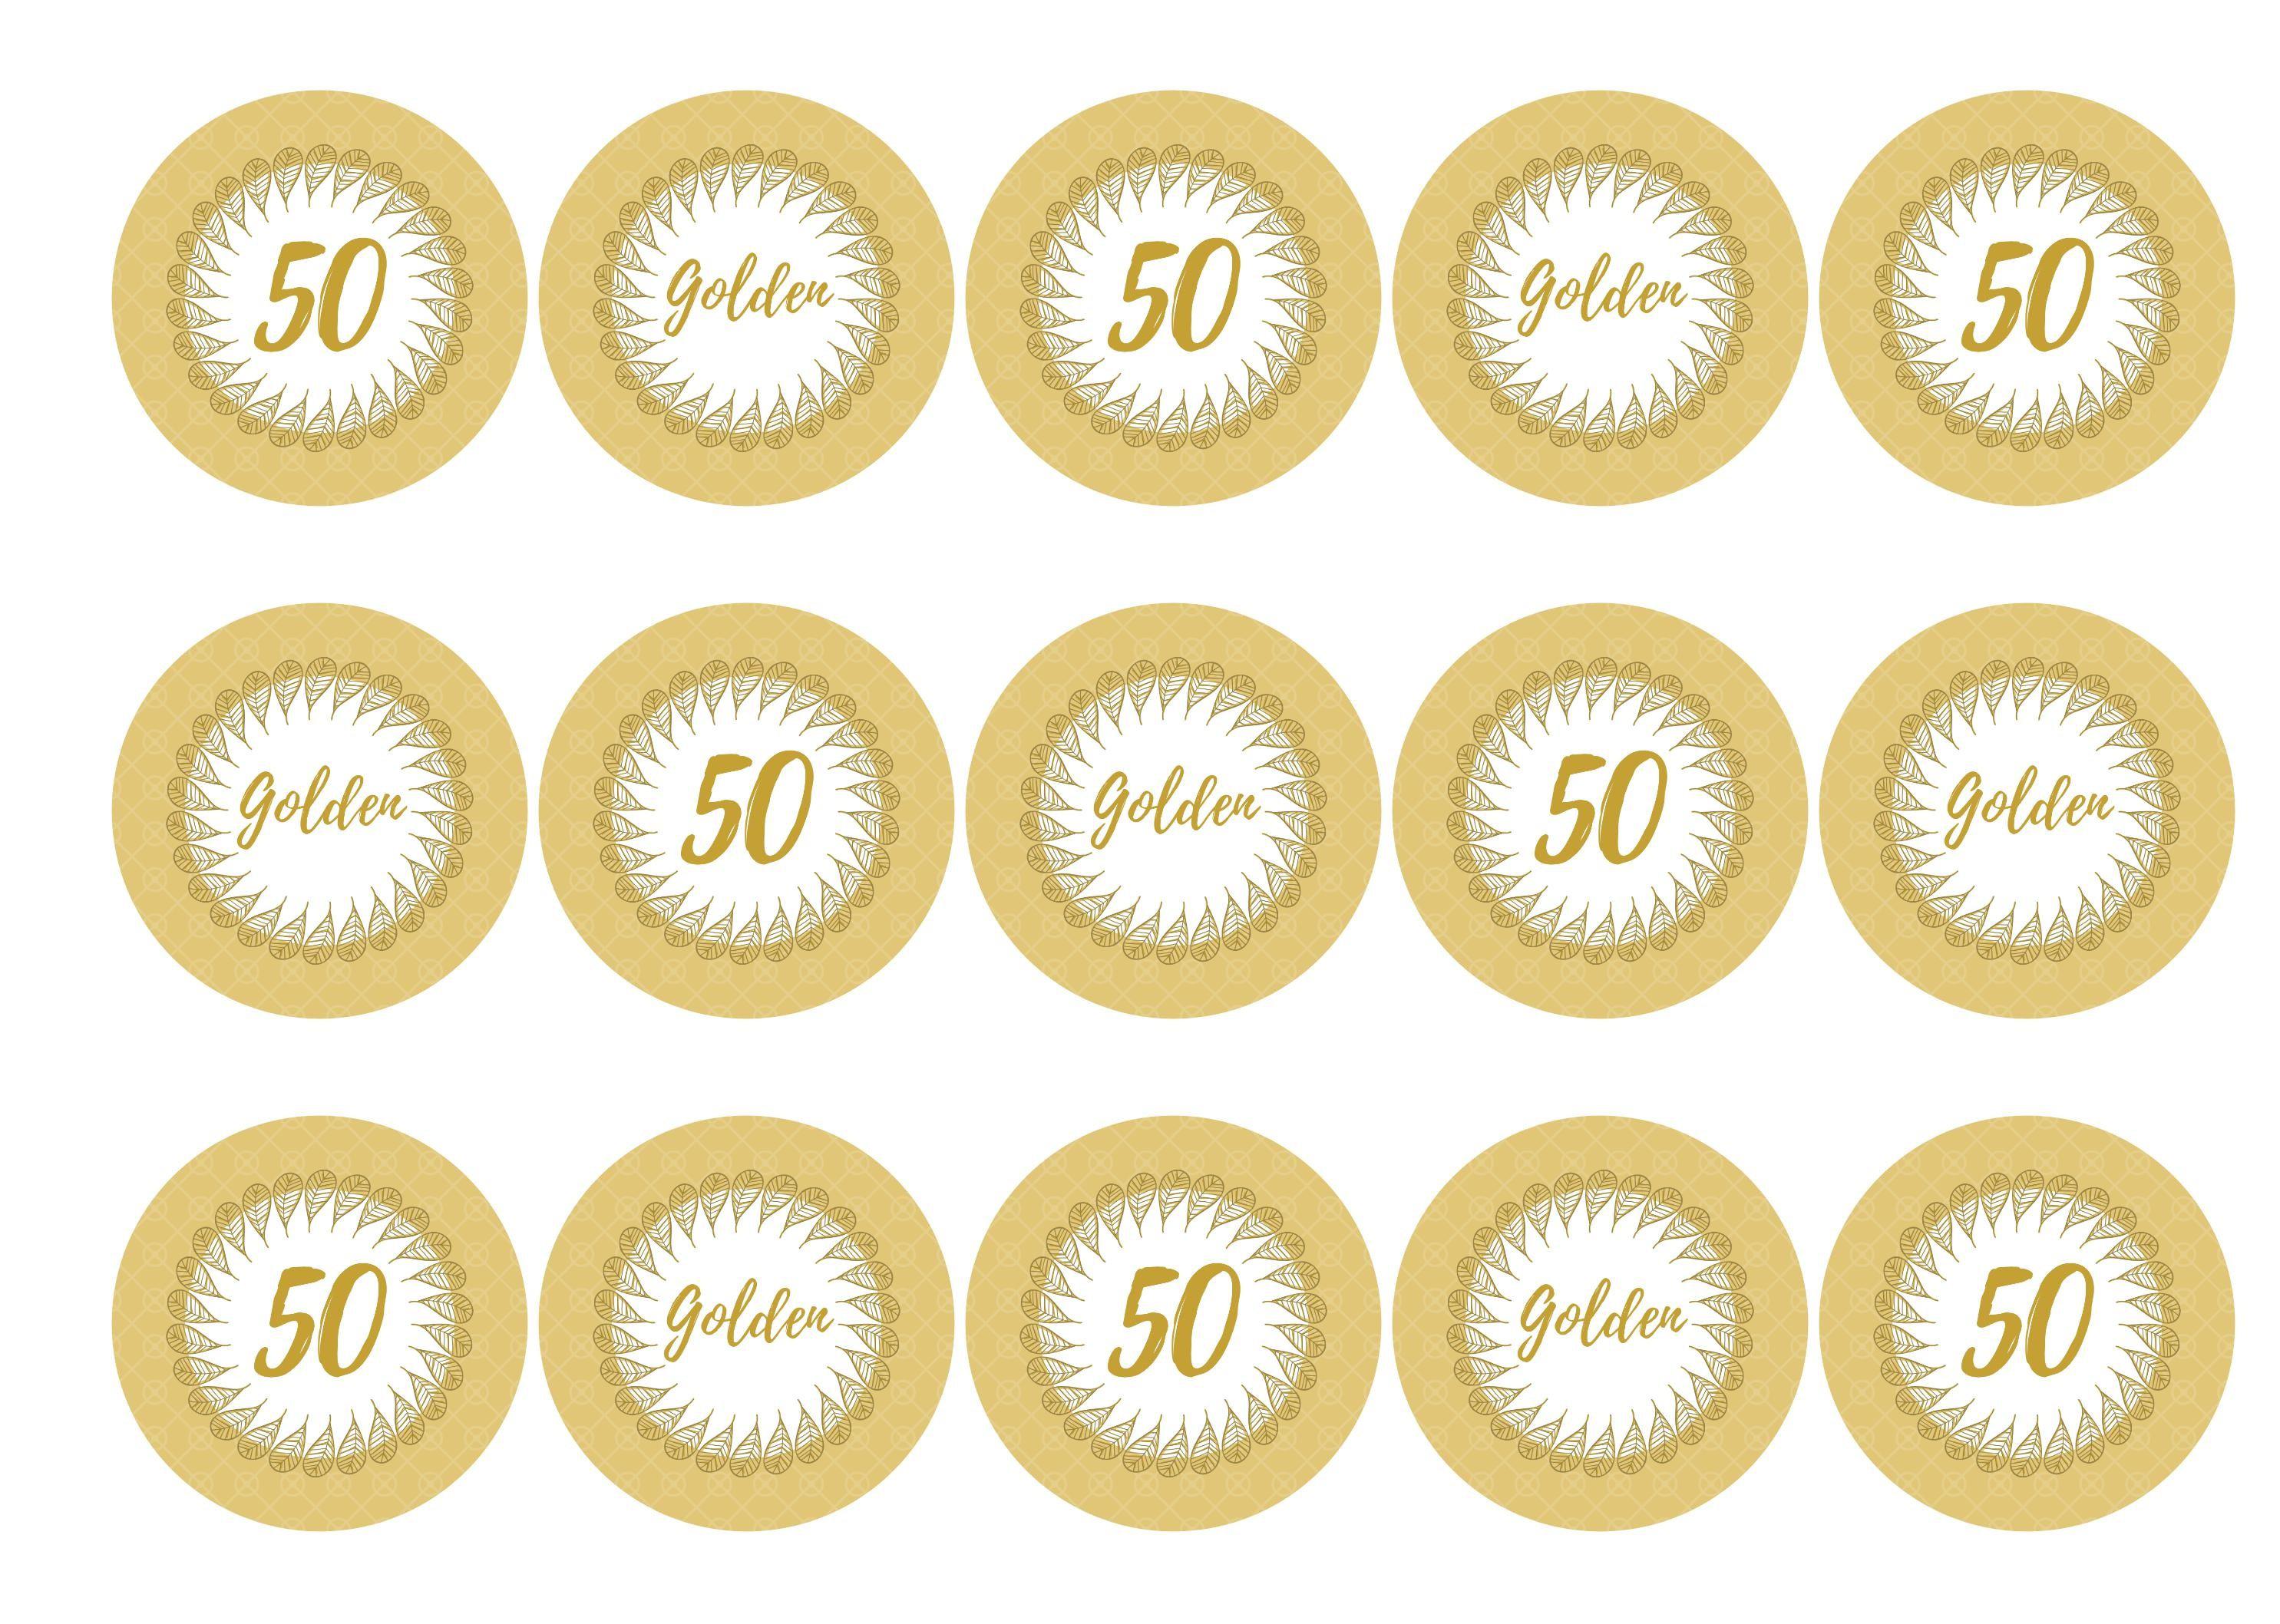 50 Cake Topper - Premium Gold Metal - 50th Birthday or Anniversary Party -  Cheers to 50 Years Sparkly Rhinestone Decoration Makes a Great Centerpiece  - Now Protected in a Box in Saudi Arabia | Whizz Cake Toppers